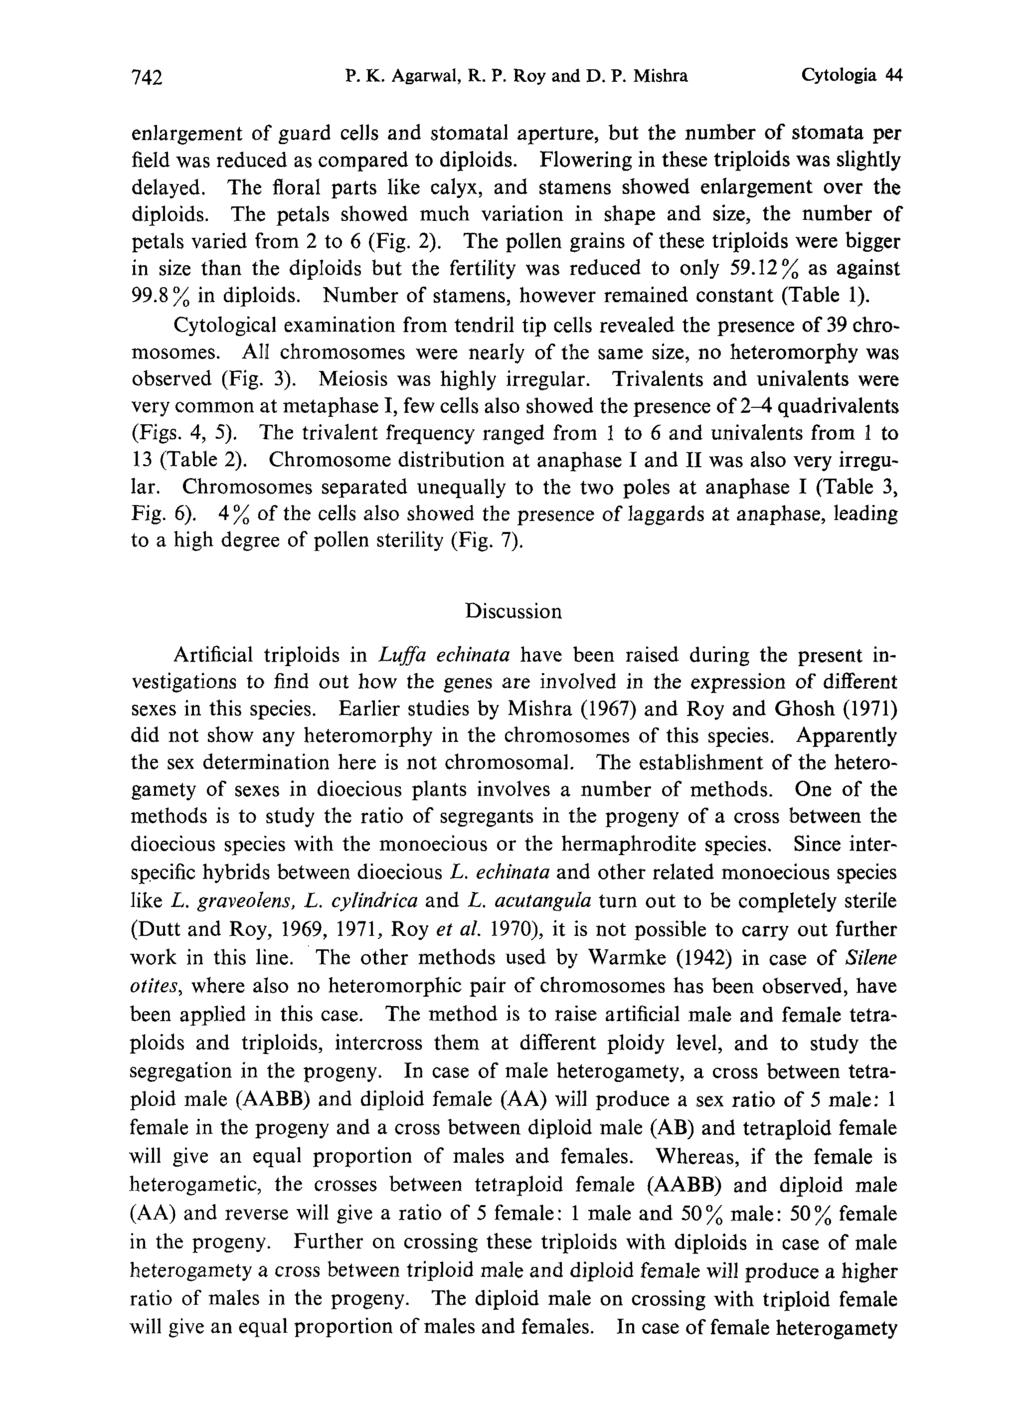 742 P. K. Agarwal, R. P. Roy and D. P. Mishra Cytologia 44 enlargement of guard cells and stomatal aperture, but the number of stomata per field was reduced as compared to diploids.